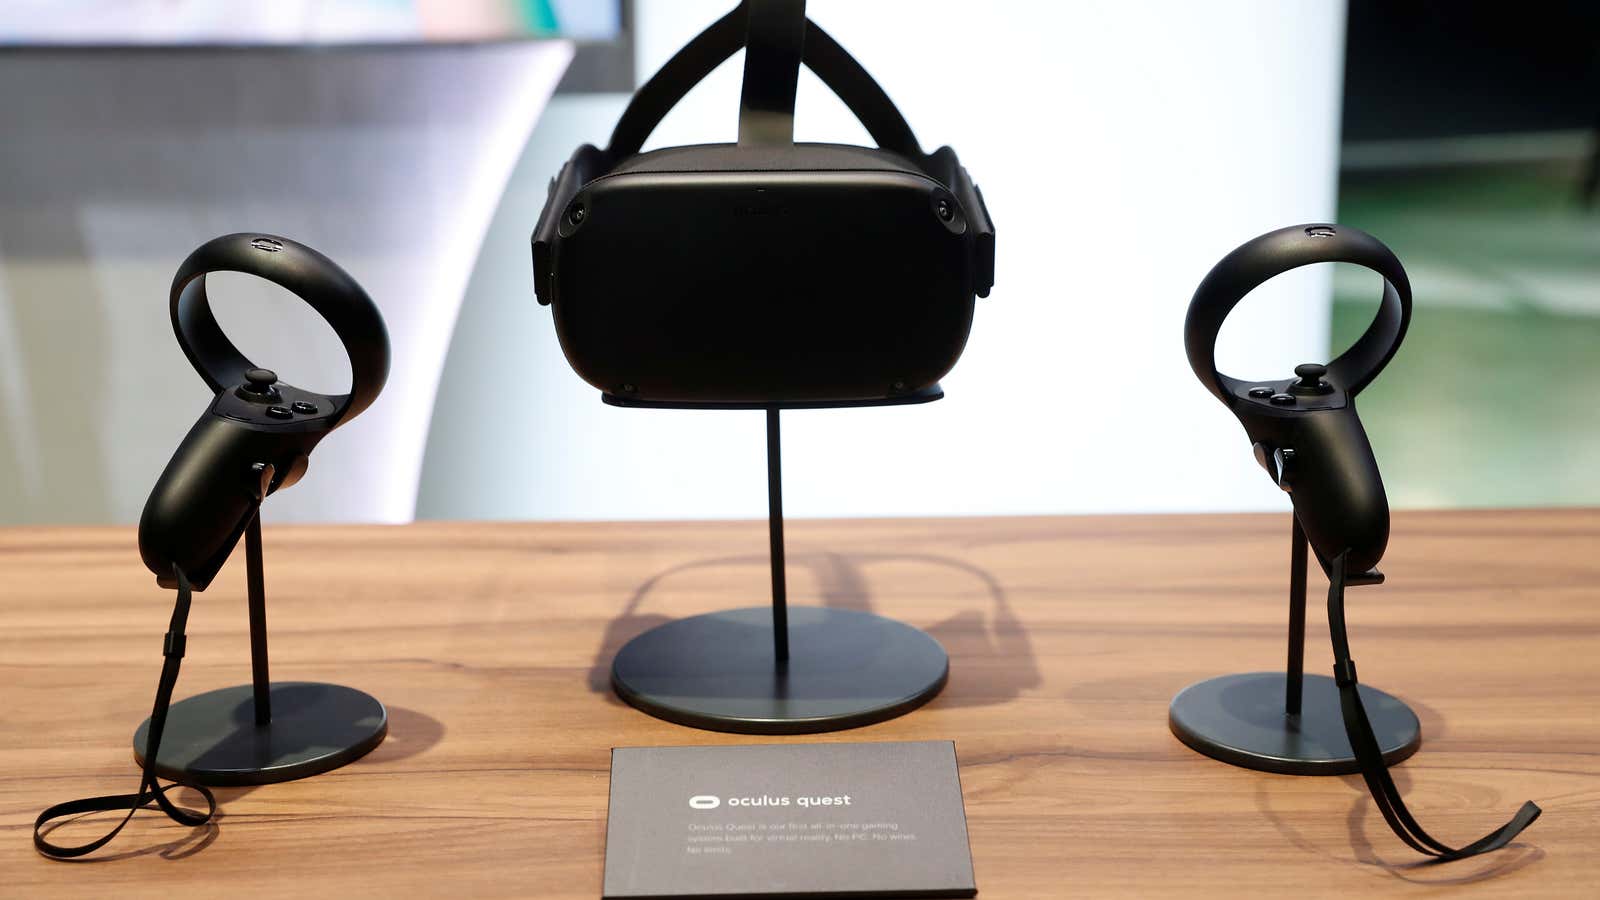 The Oculus Quest virtual reality headset, released in 2019.